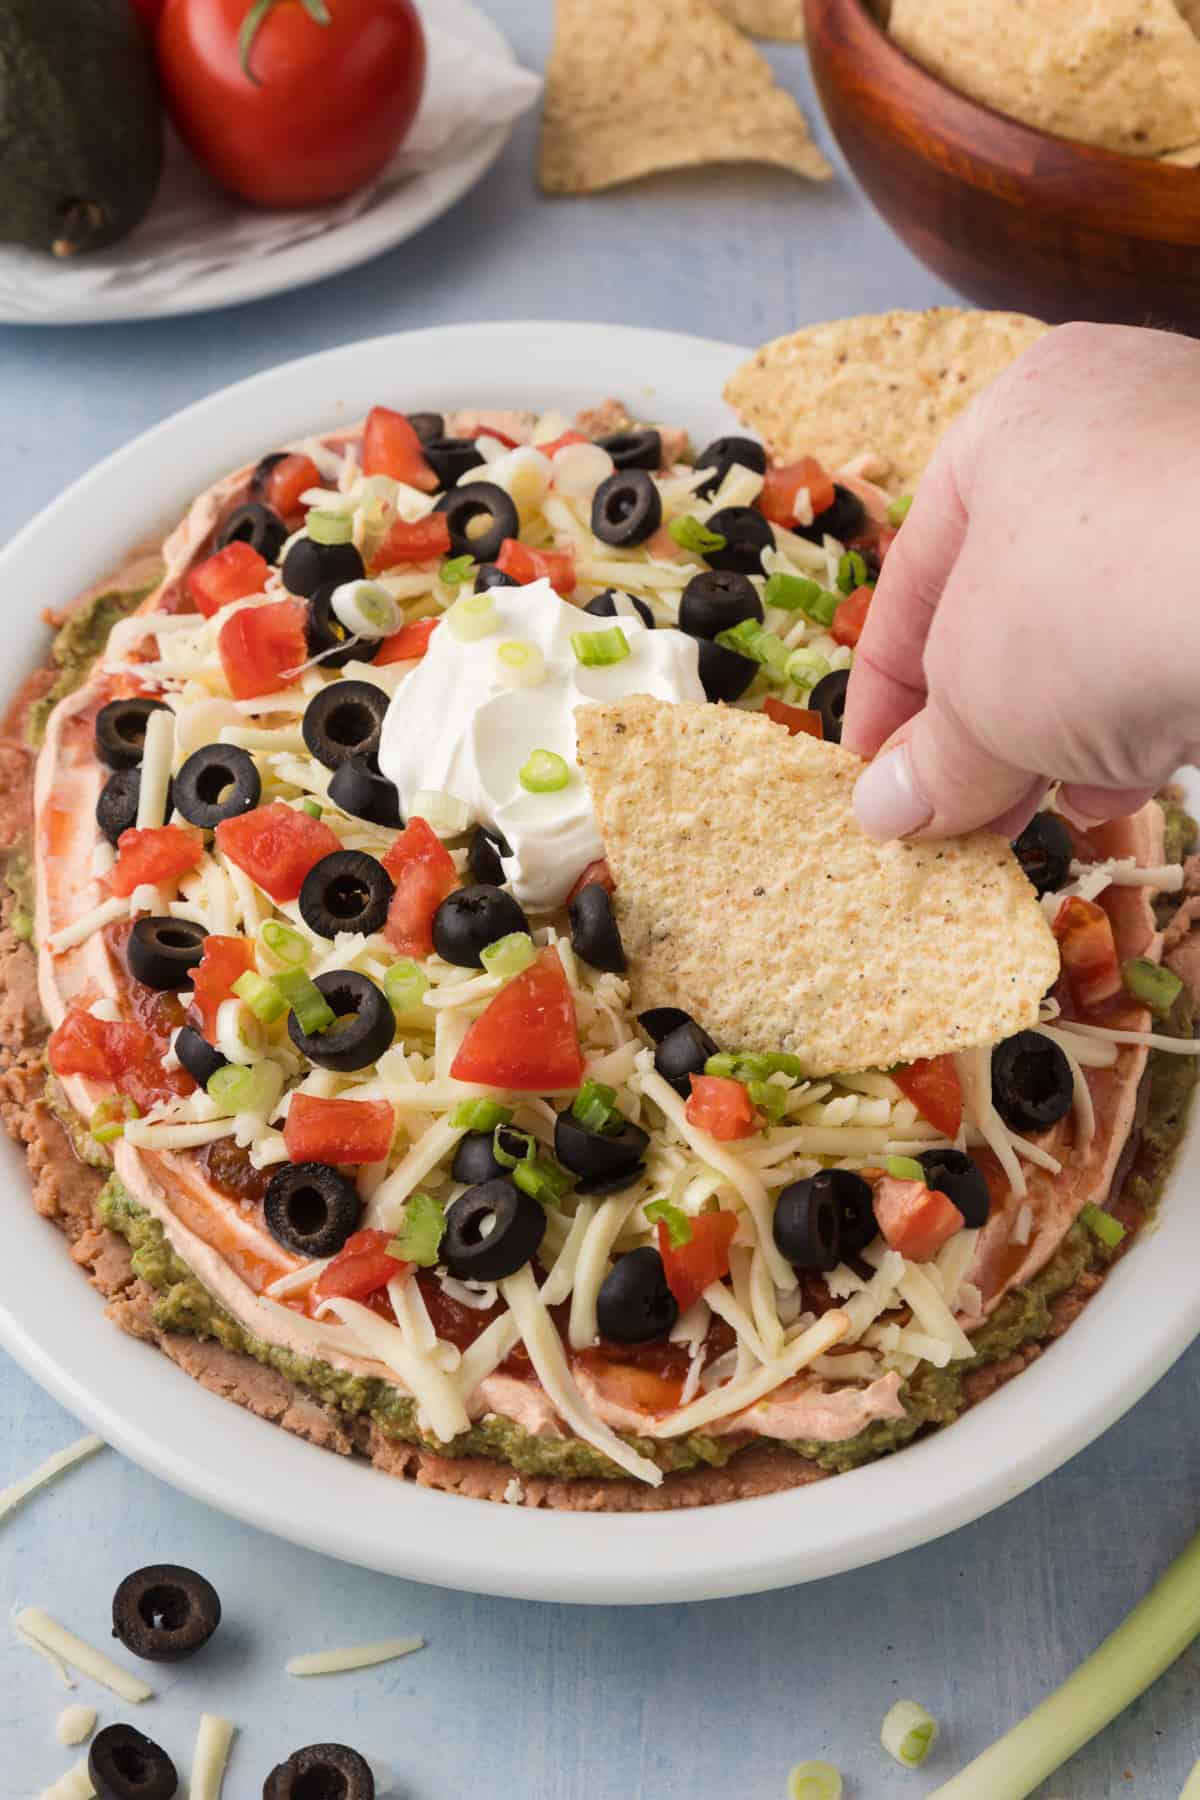 A person is dipping a tortilla into a 7 layer dip.